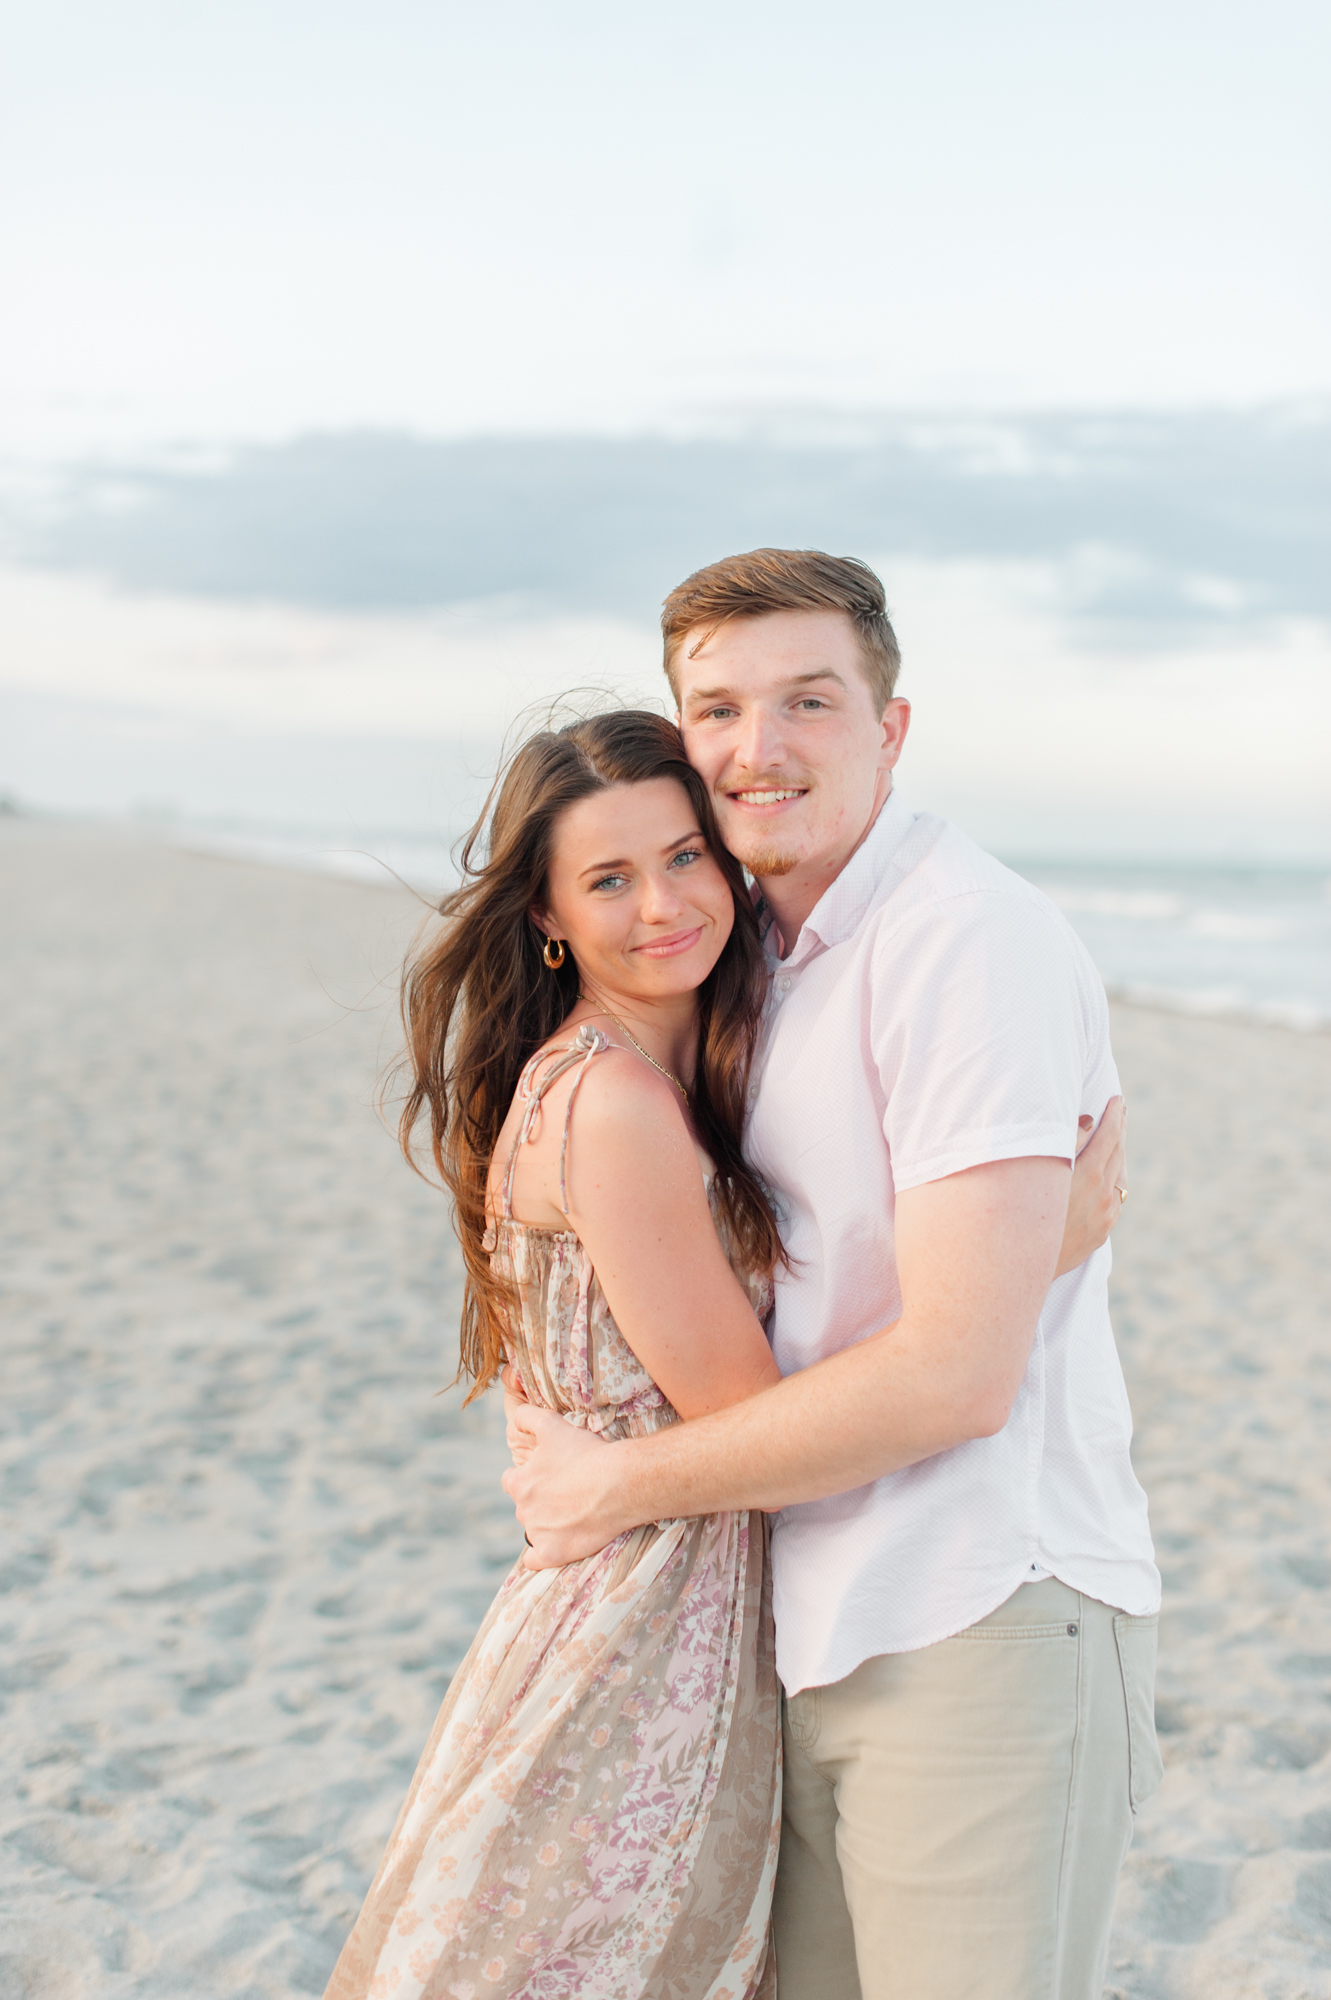 Sweet, stunning young couple poses at the beach and smiles holding each other dearly during their sunset photoshoot Orlando yoga studios